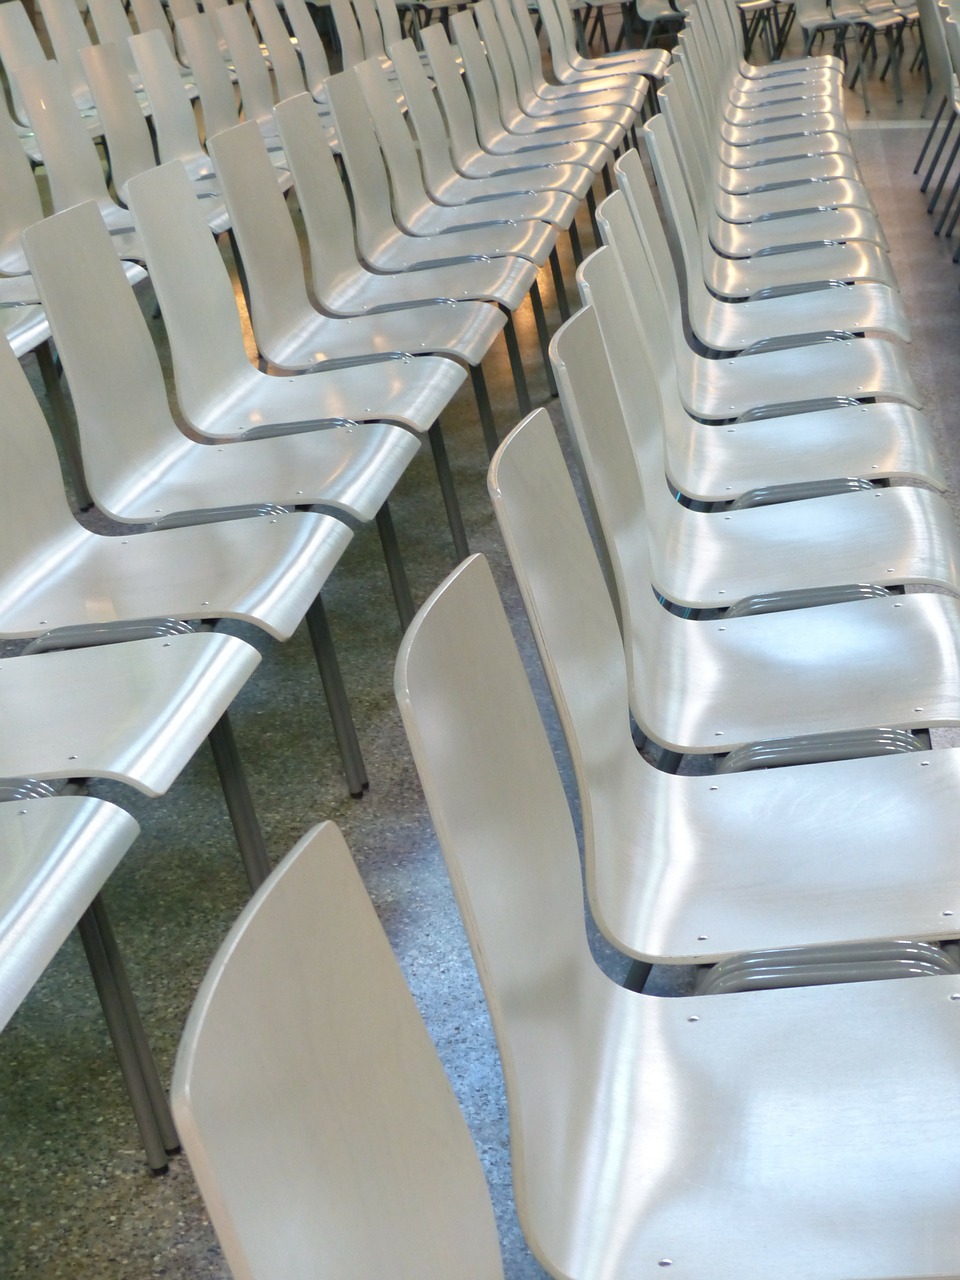 chairs chair series rows of seats free photo